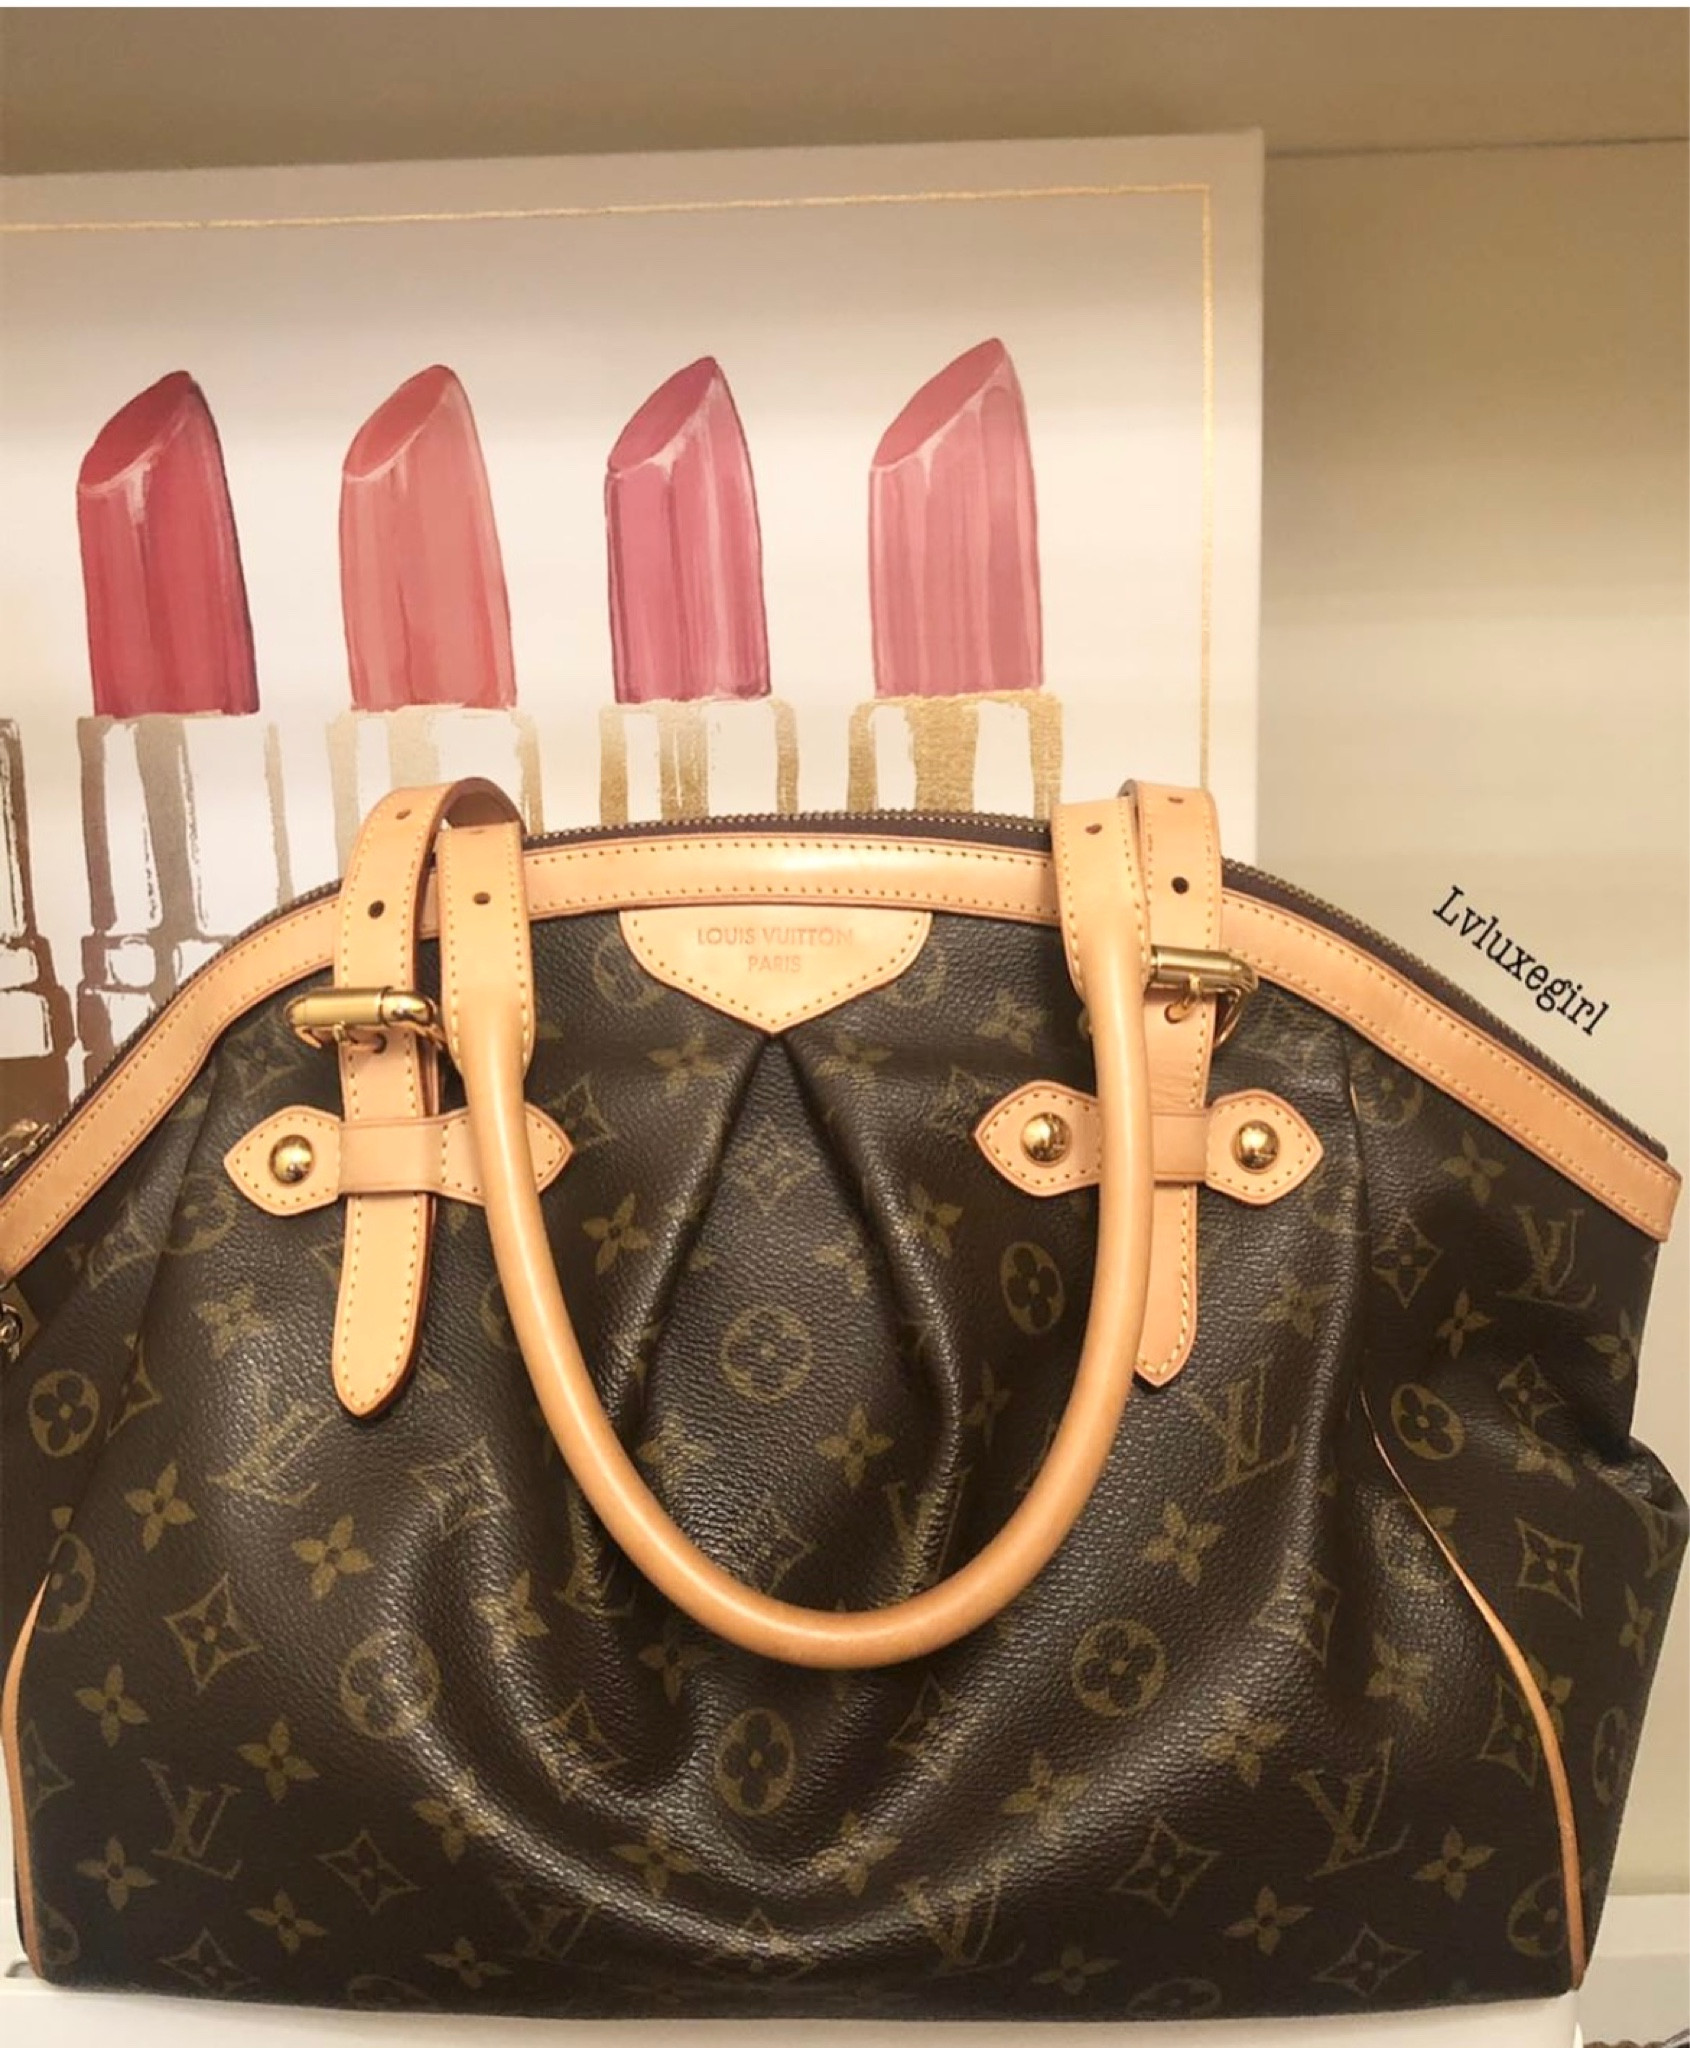 Any tips/advice/warnings for Sac Plat PM? : r/Louisvuitton